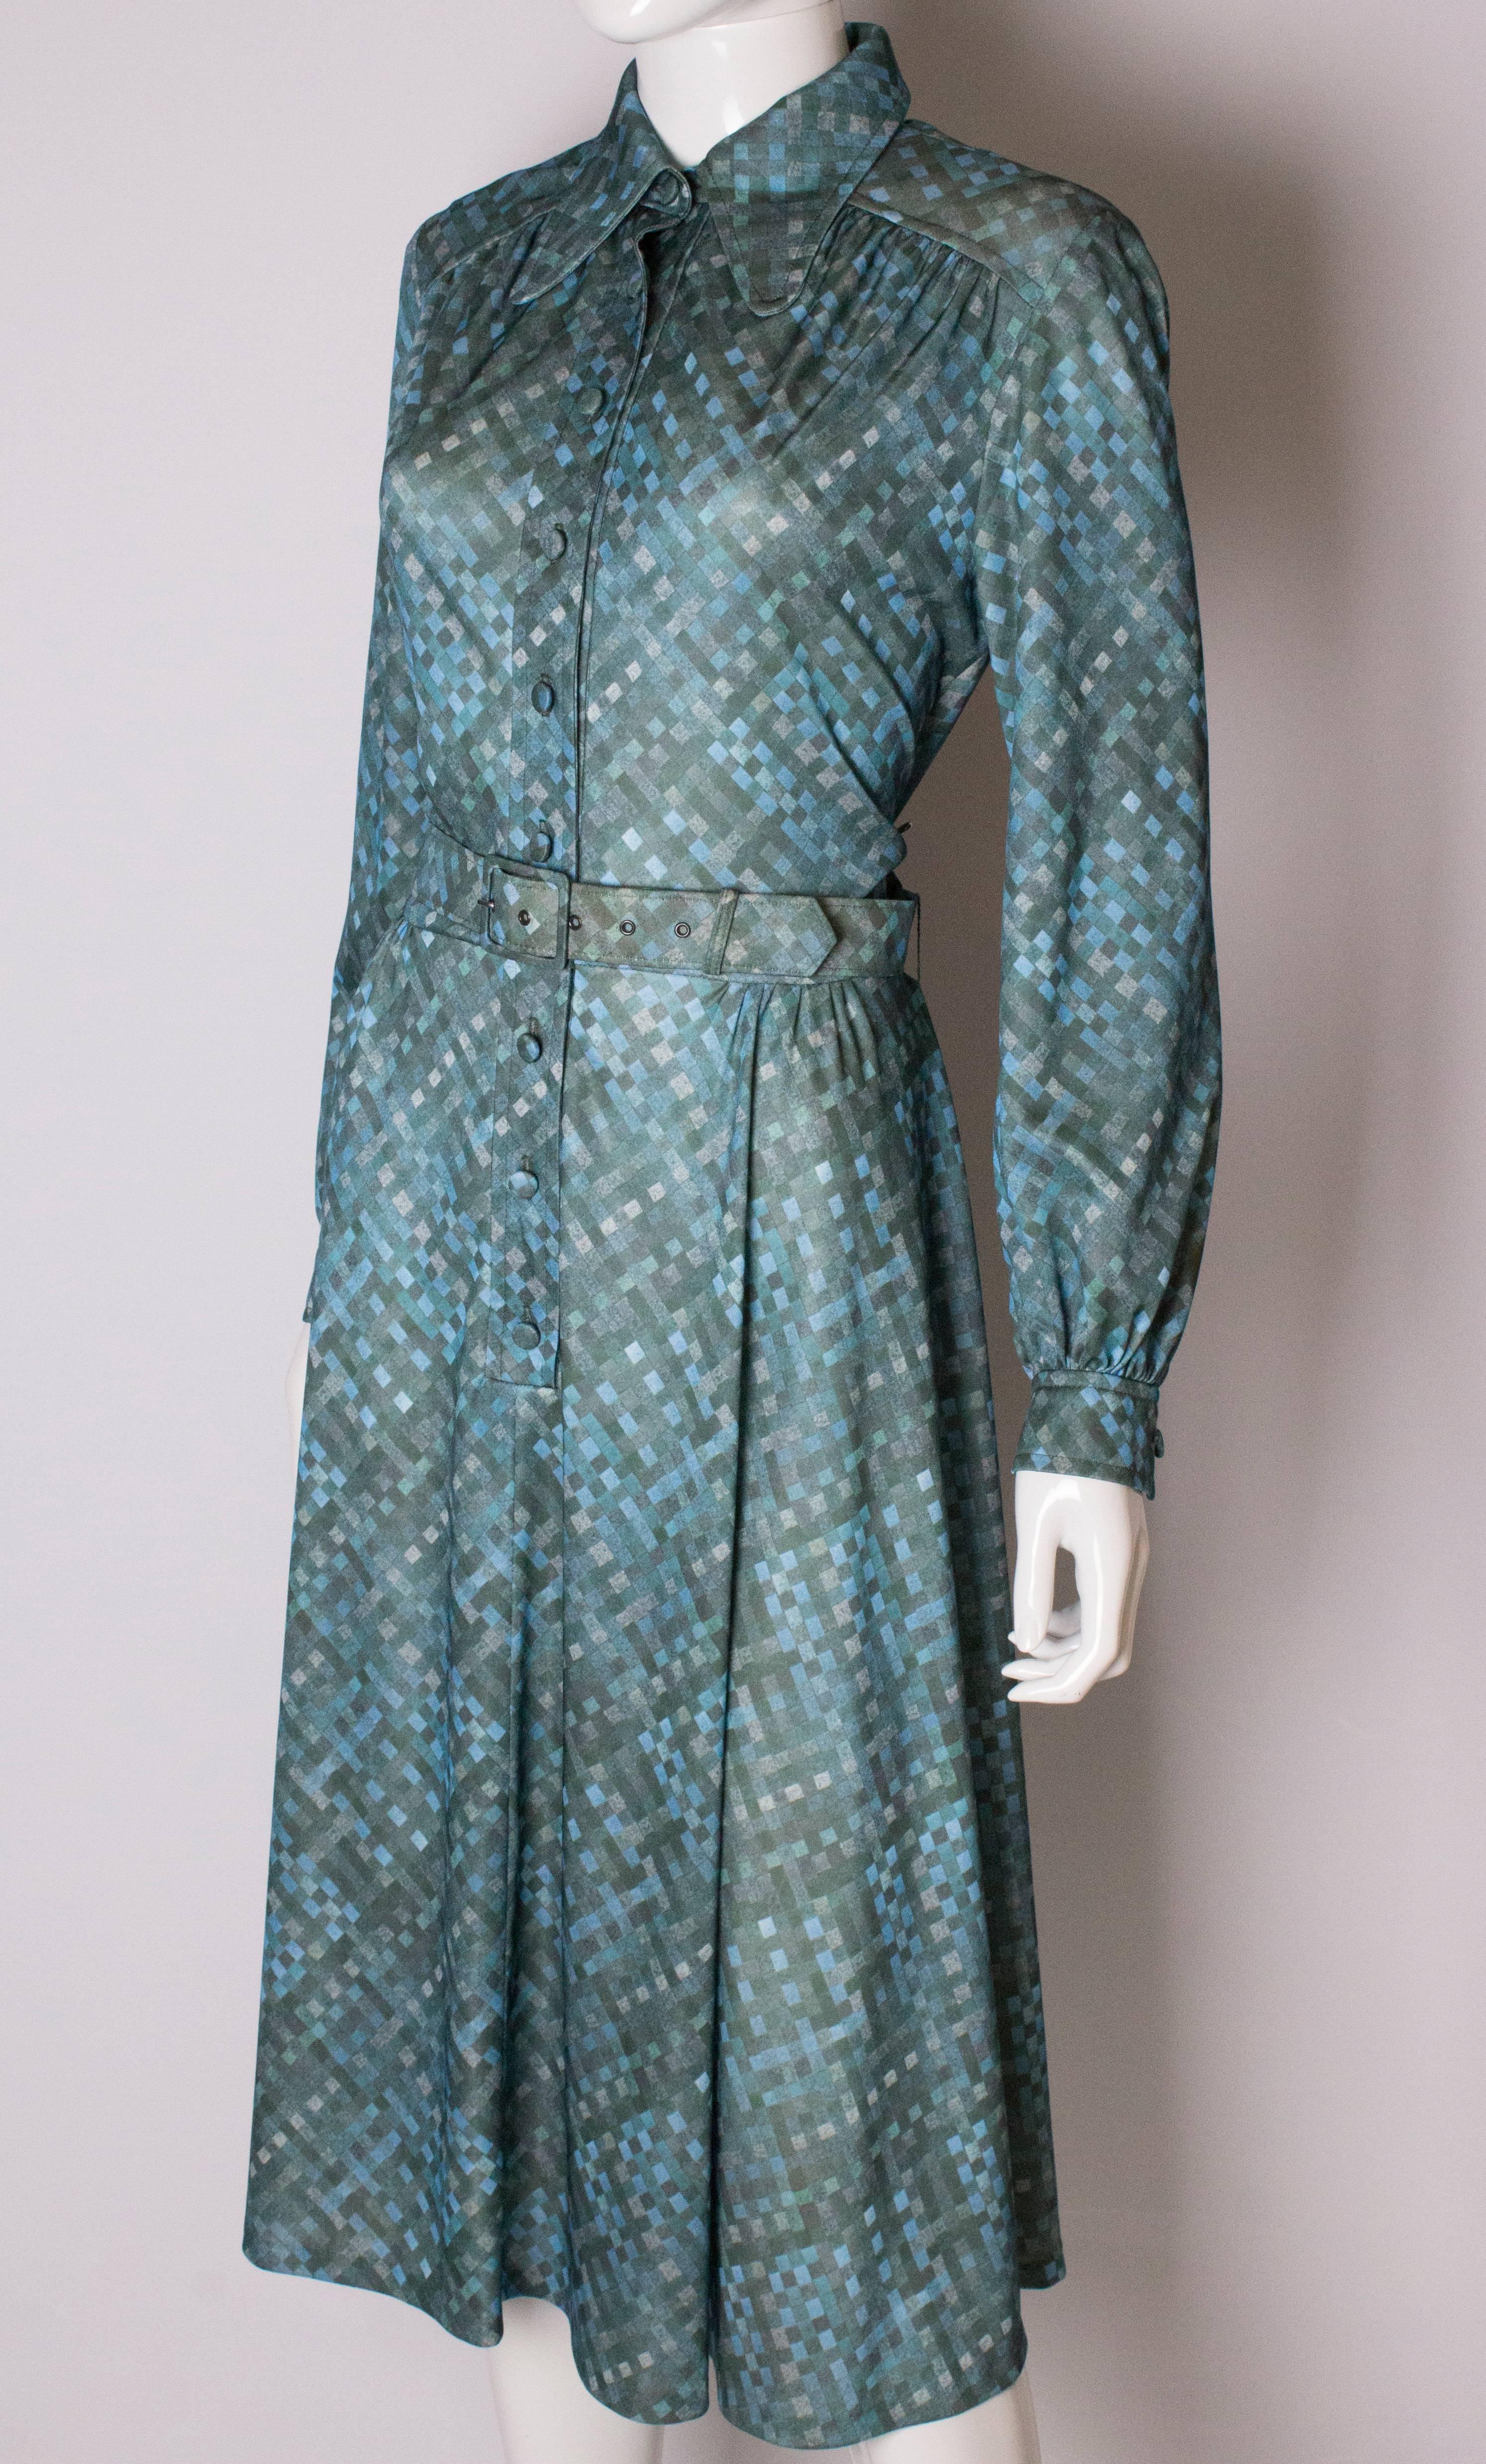 Gray A vintage 1970s green printed day dress by Carnegie London 